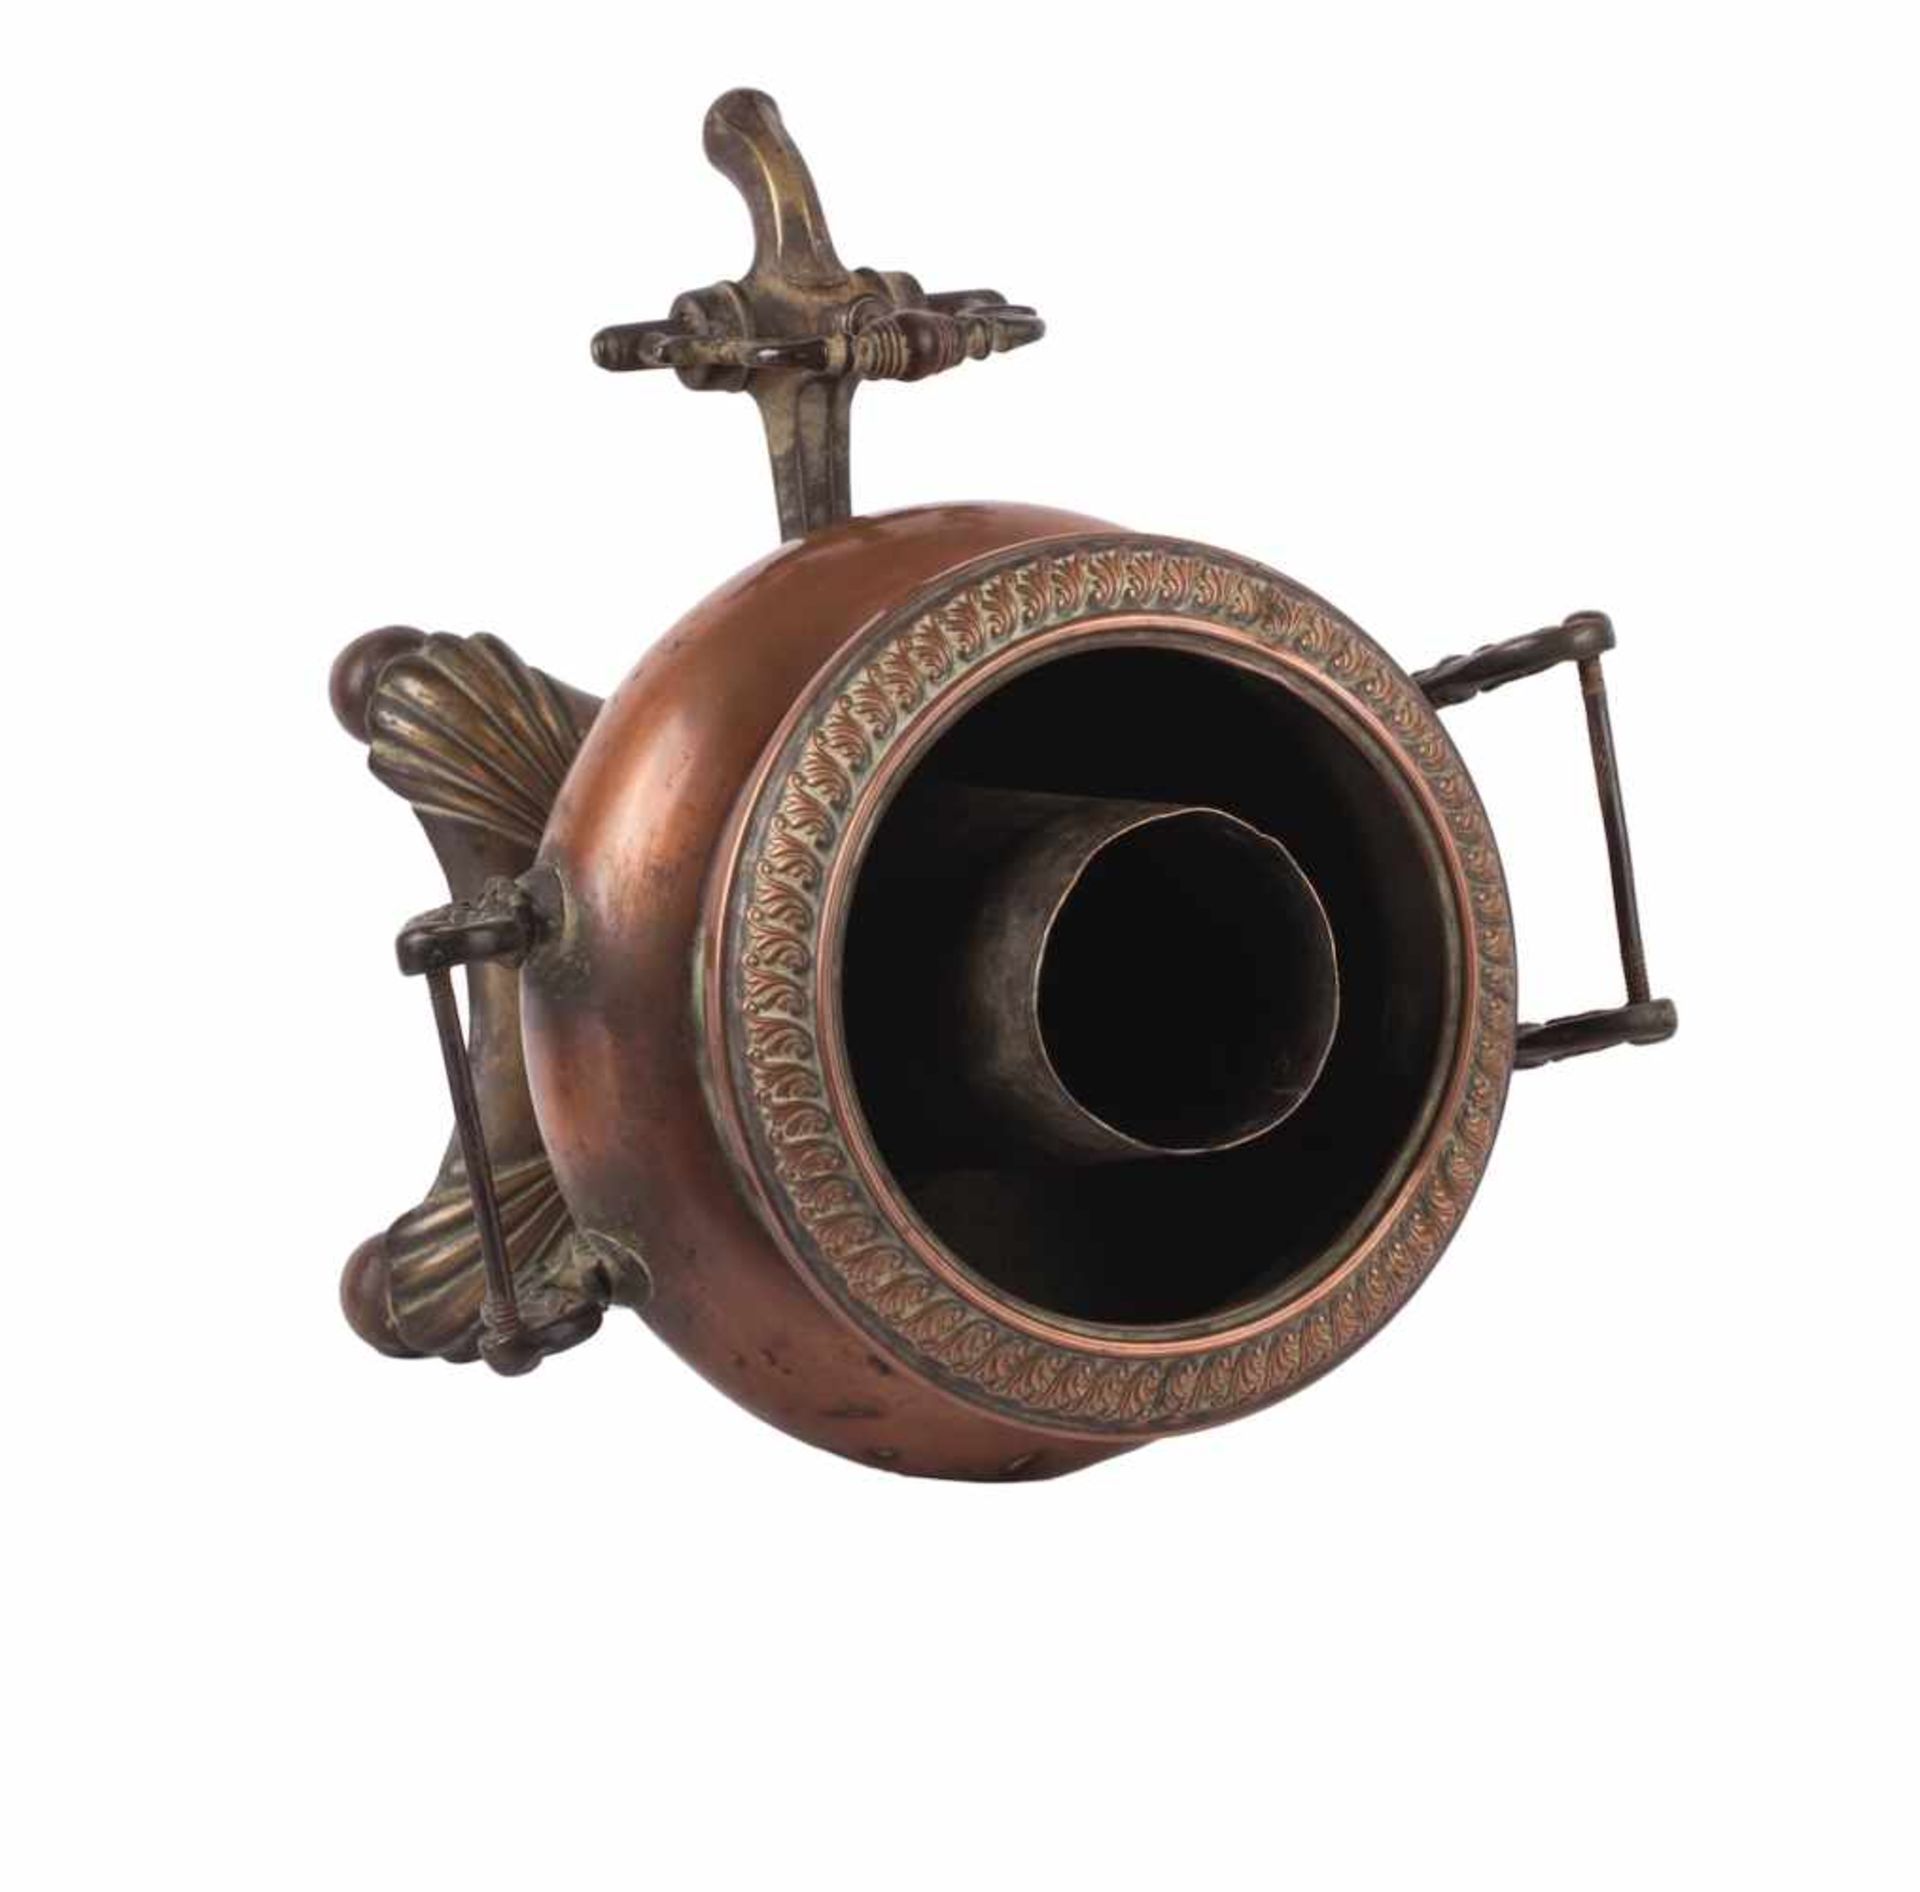 Small samovar in the shape of a vaseSmall samovar in the shape of a vase. Copper, cast, chasing, - Image 5 of 6